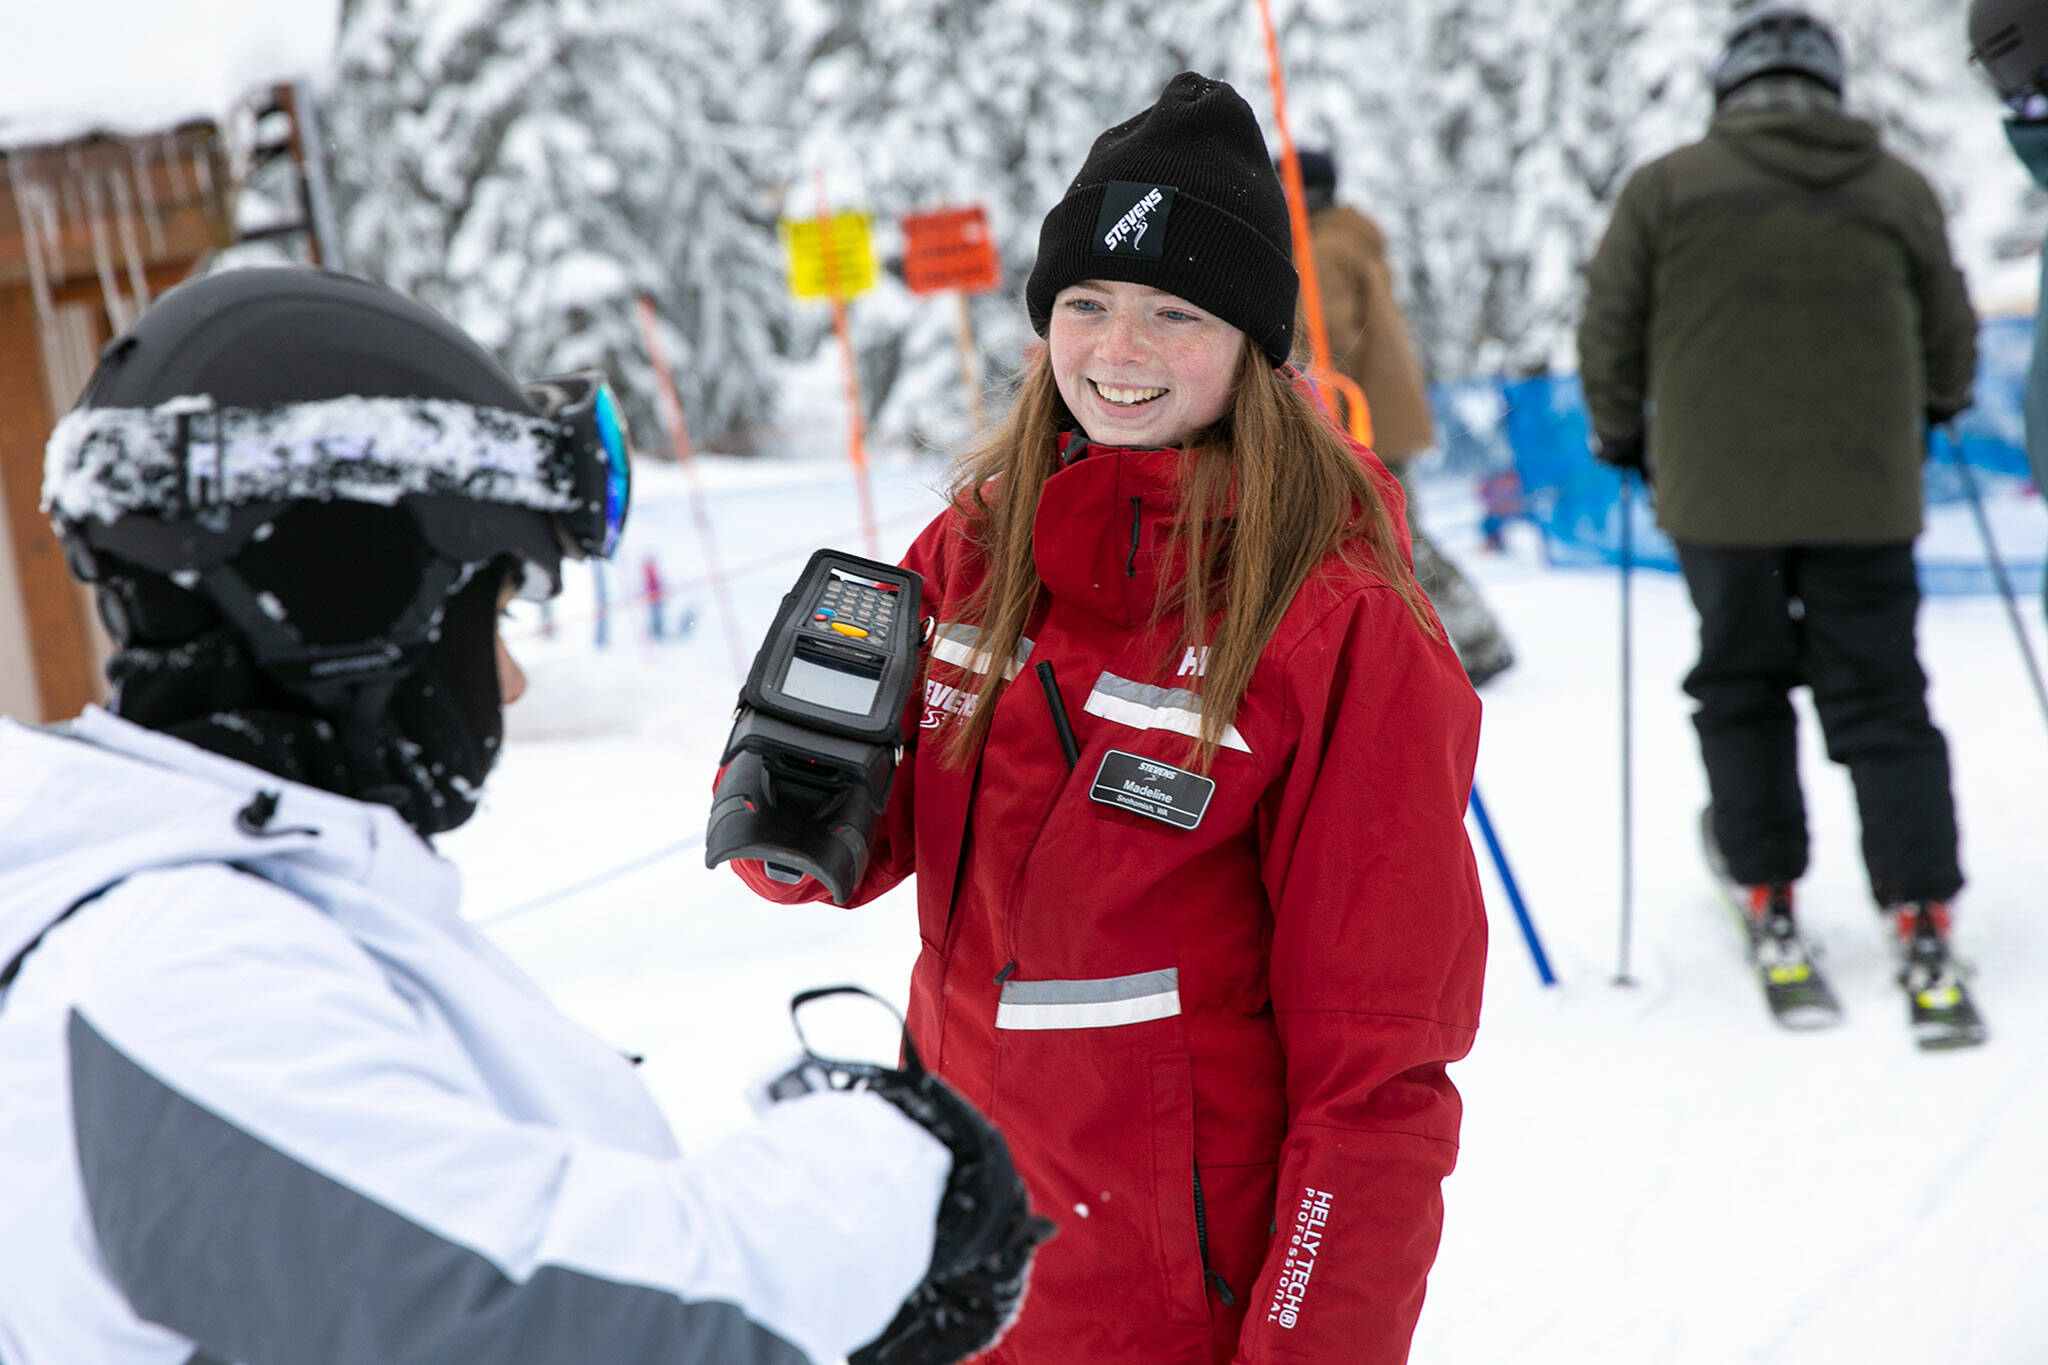 Madeline Stewart, working her first season at Stevens Pass, scans passes on the opening day of ski season at Stevens Pass Ski Area. (Ryan Berry / The Herald)